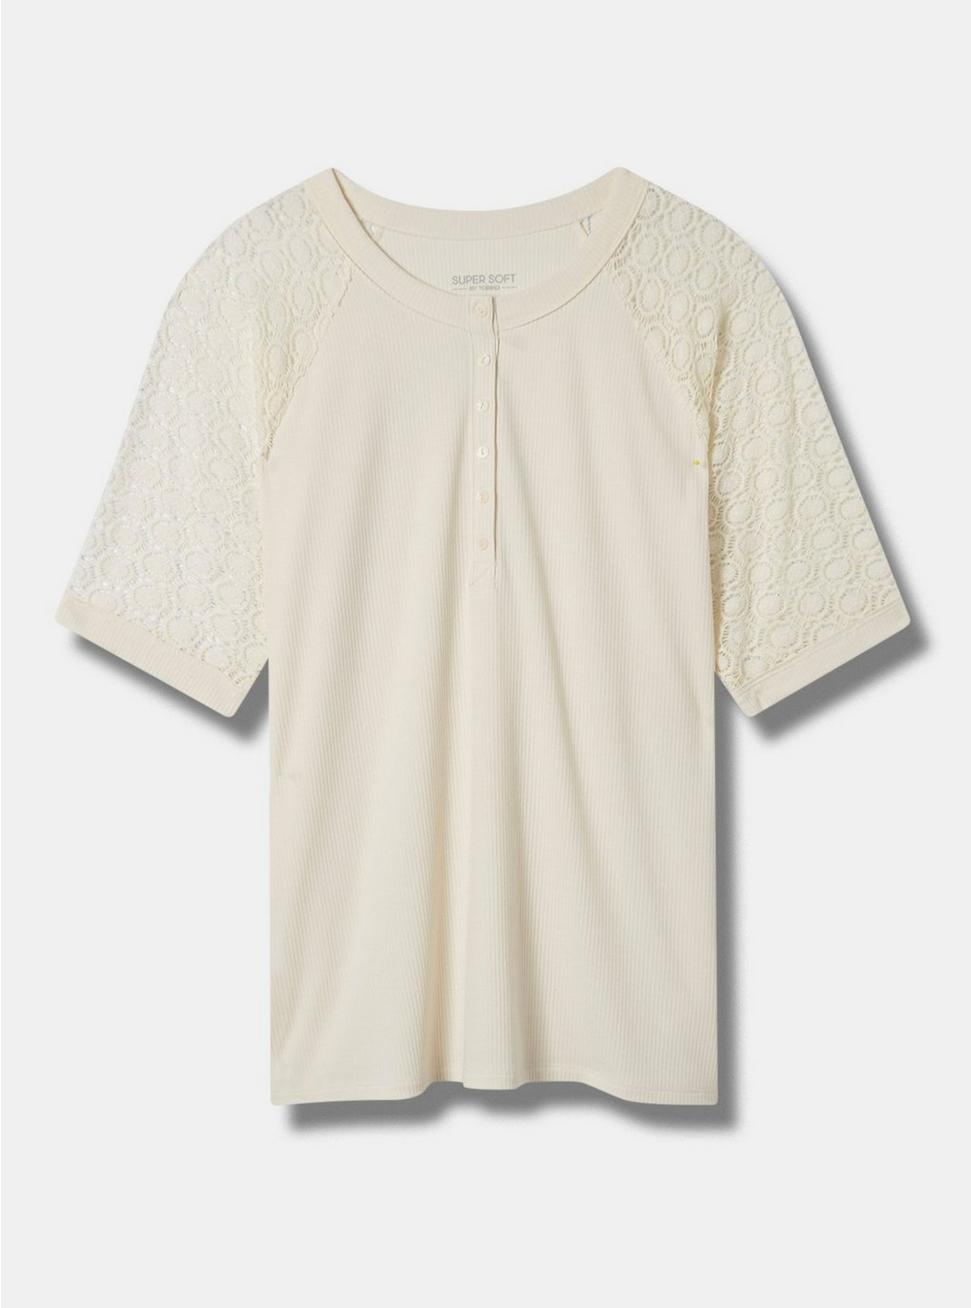 Fitted Super Soft Rib Lace Inset Raglan Henley, PRISTINE, hi-res